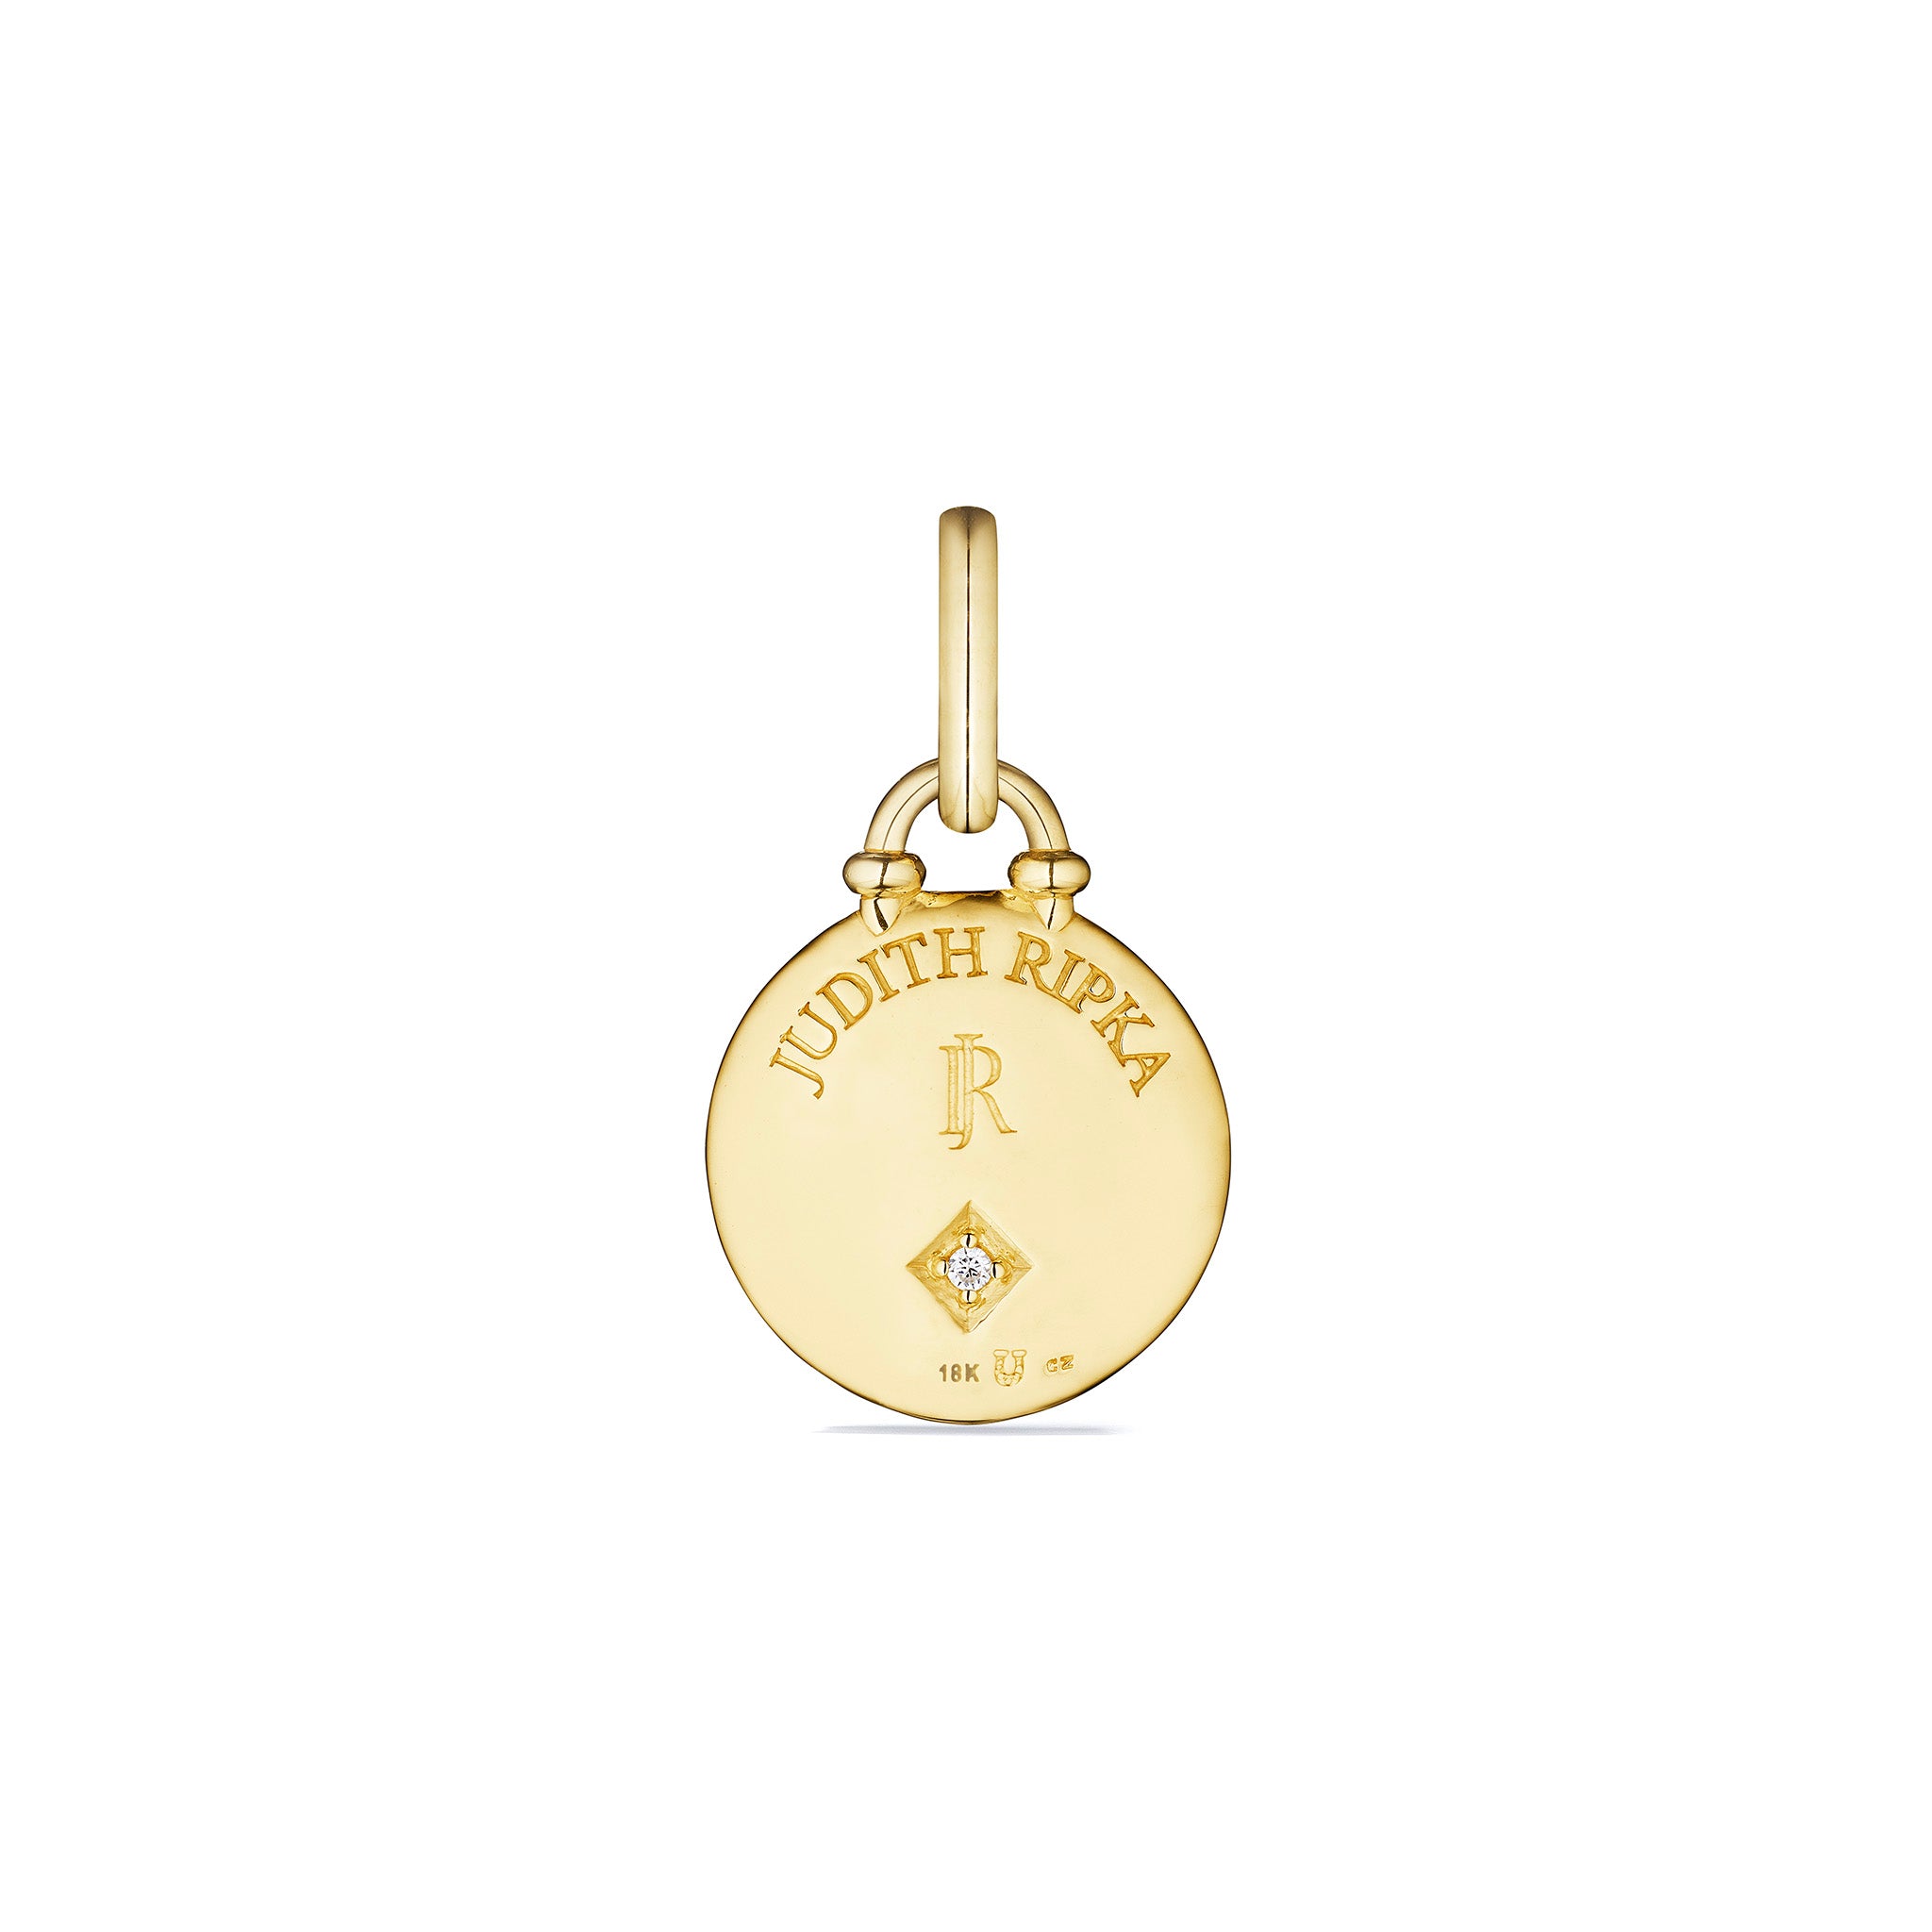 Little Luxuries Star of David Medallion with Diamonds in 18K